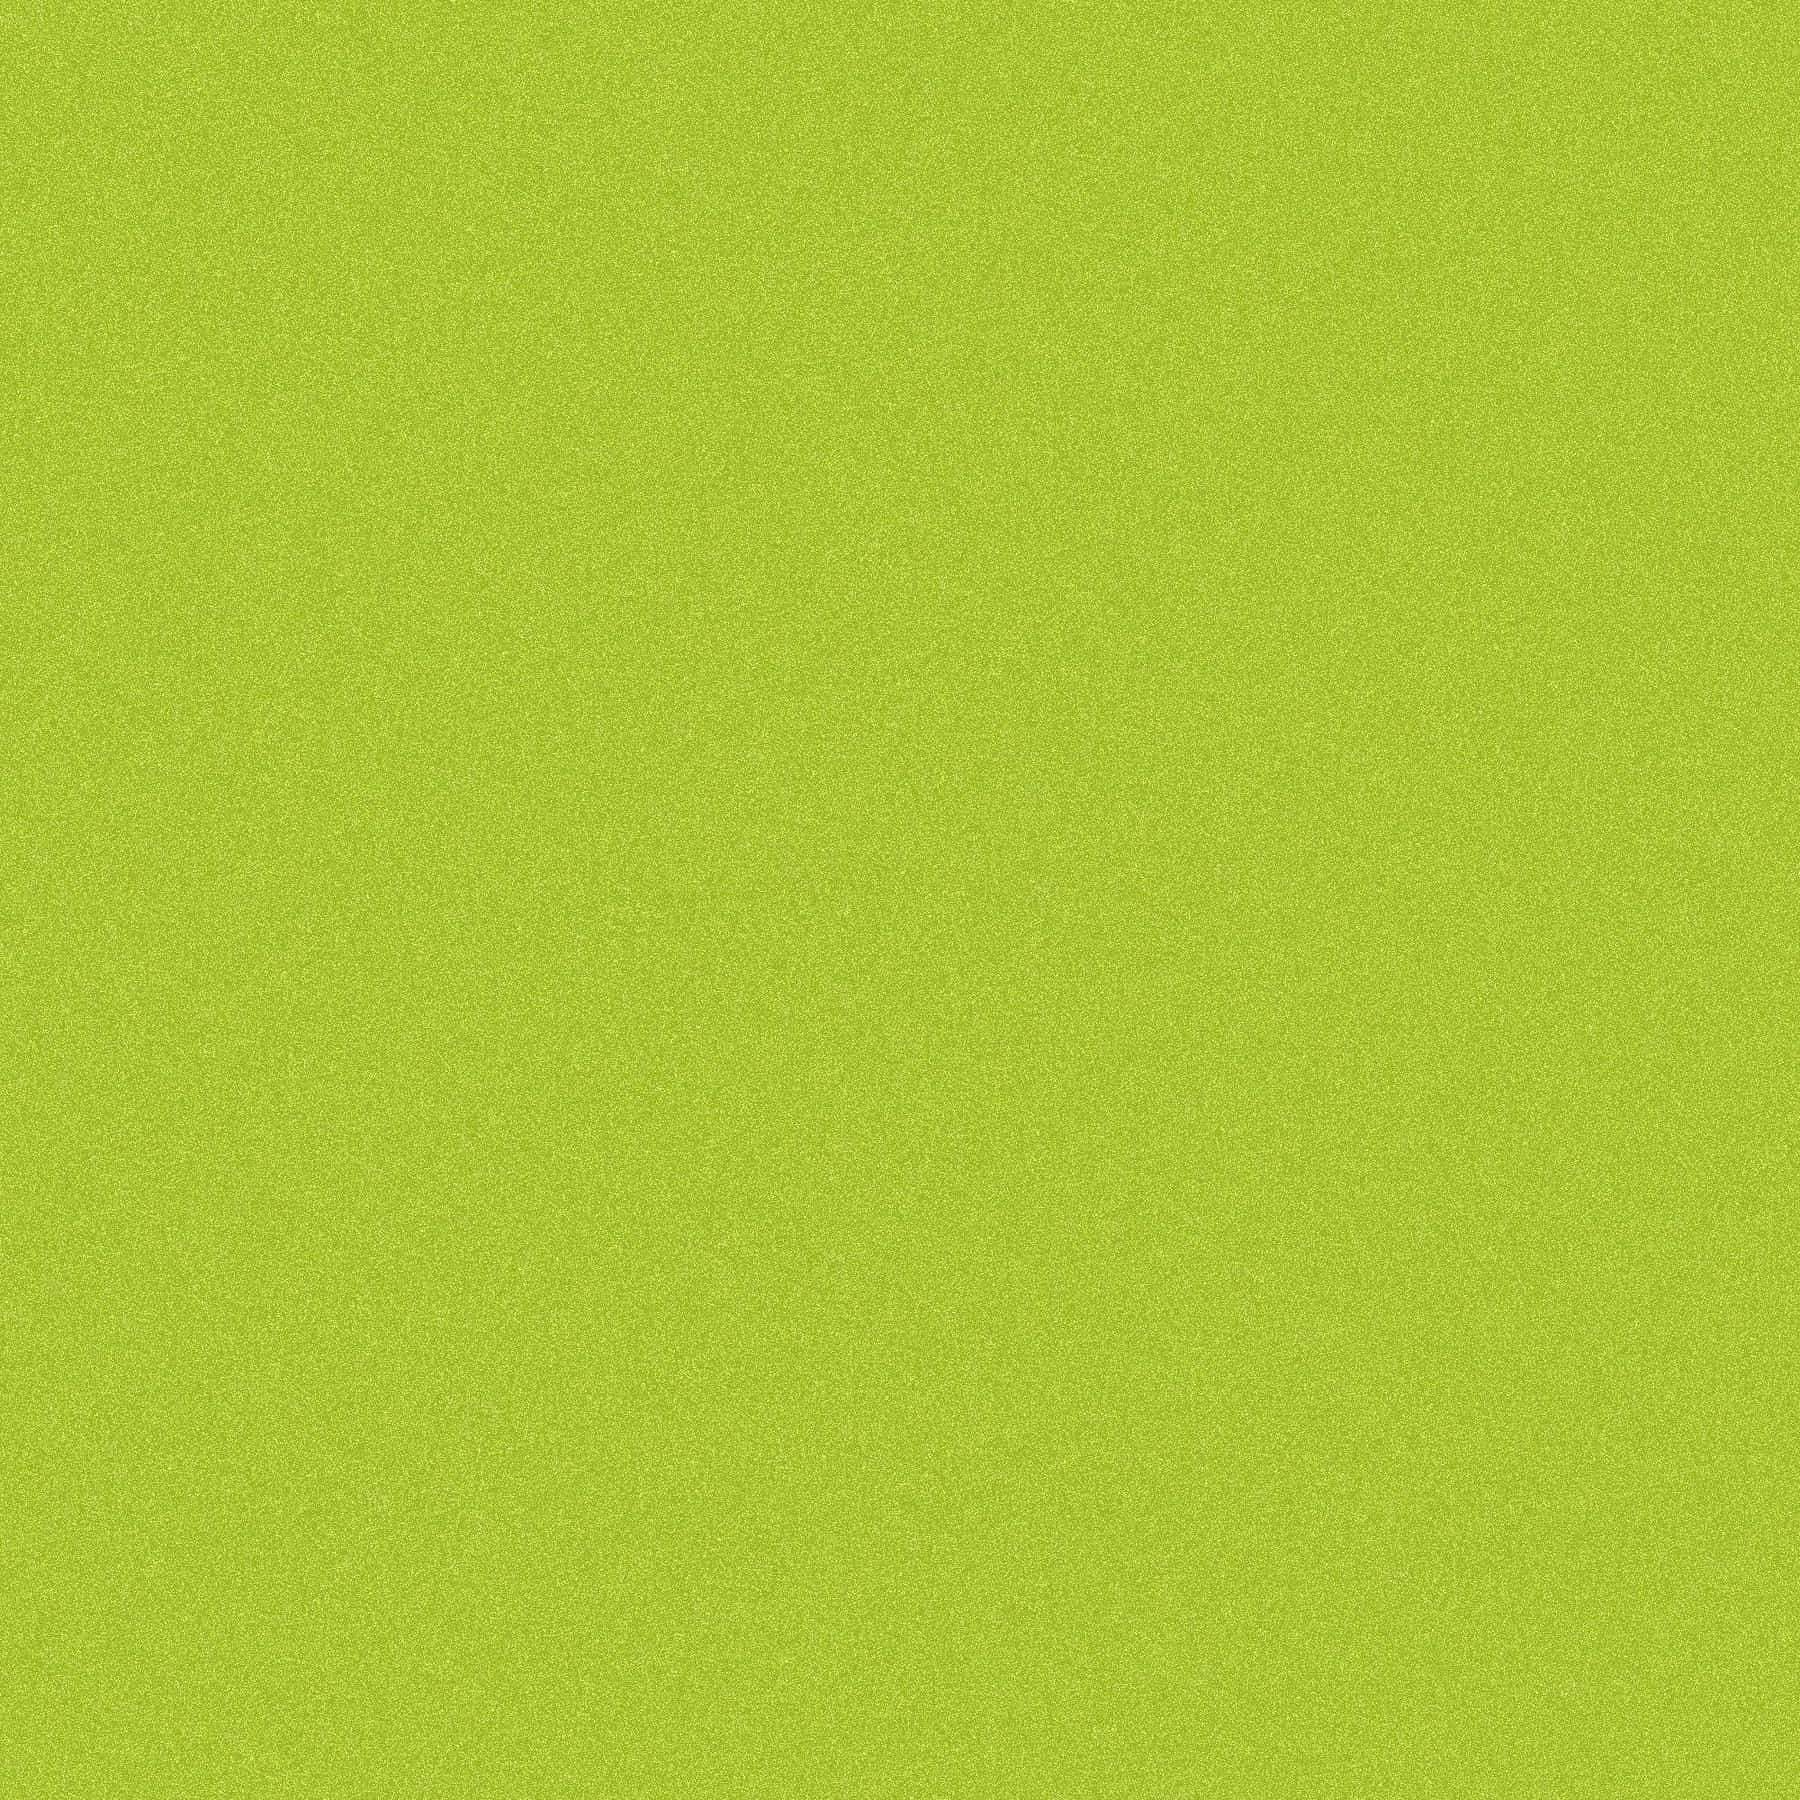 Vibrant Green Solid Color Background Wallpaper